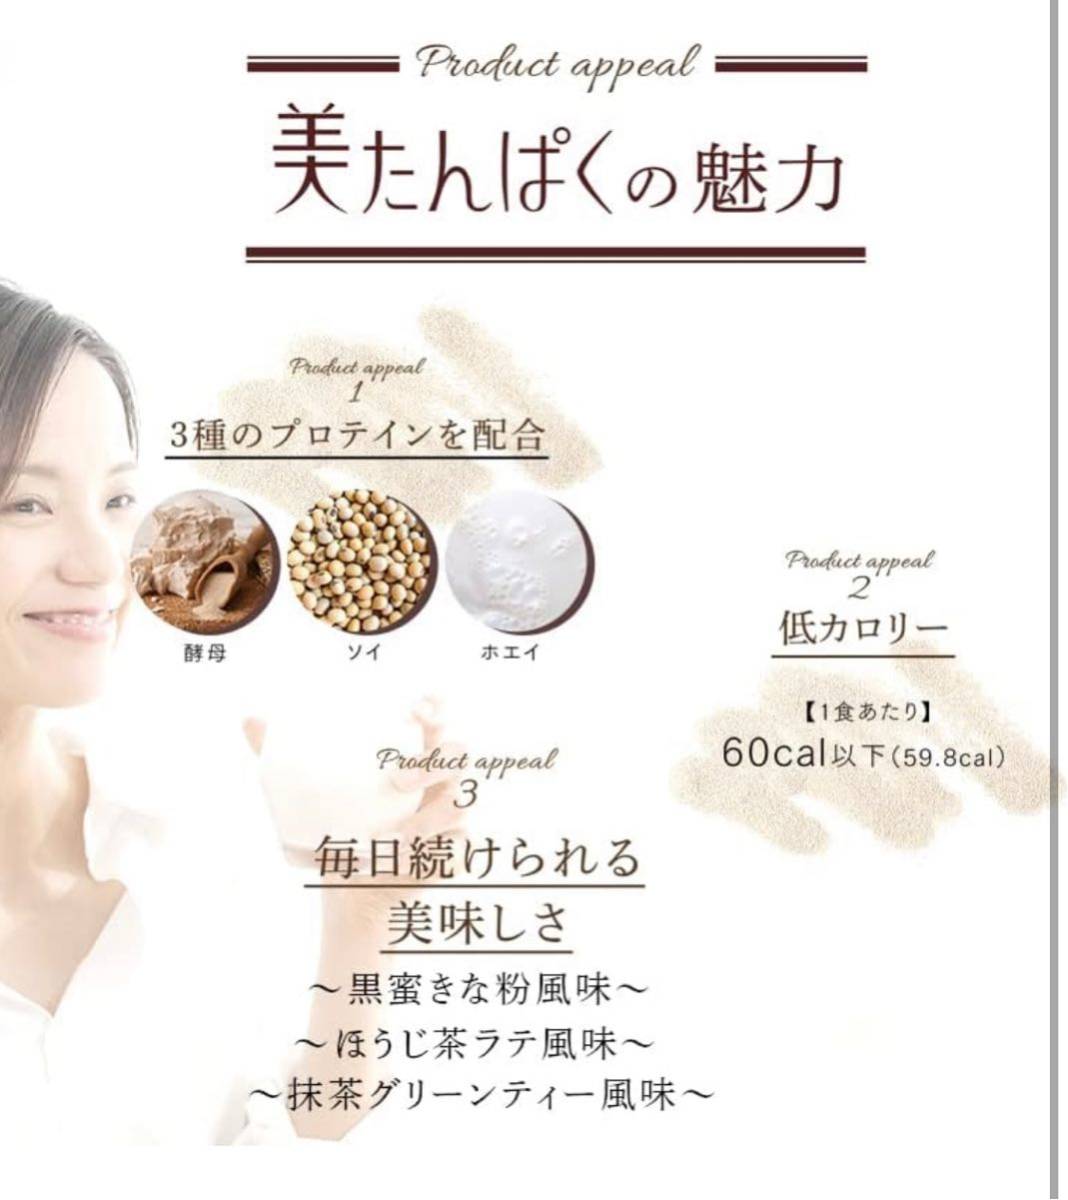 .. beautiful person [ beautiful ....] protein beauty low calorie beautiful taste ..1 months minute woman domestic production Sera mido. acid . health domestic production dark molasses ... manner taste 